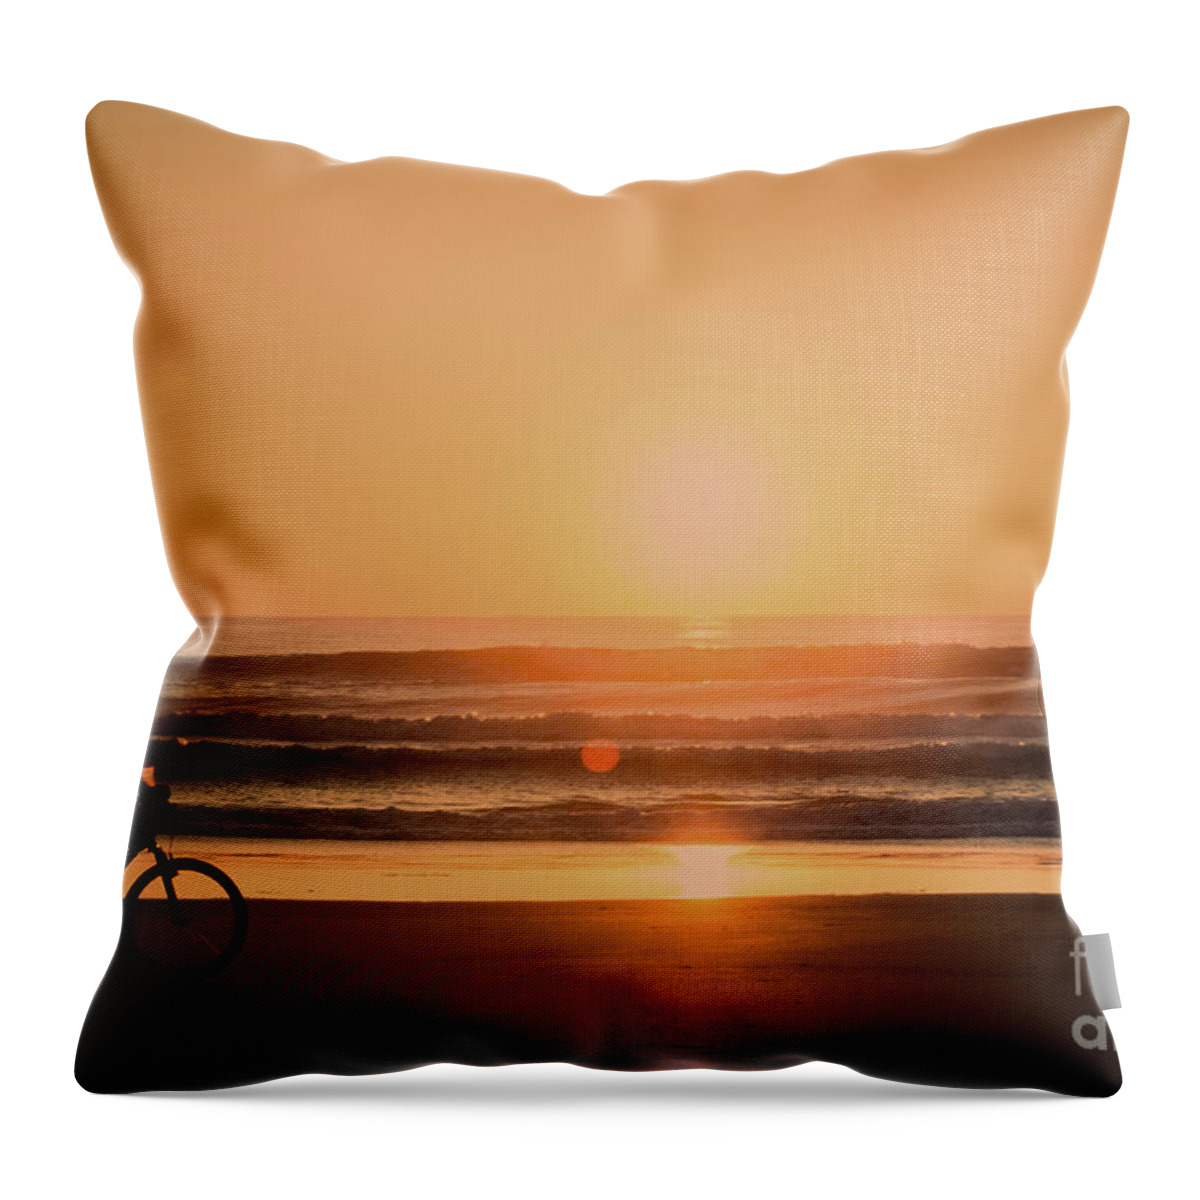 Daytona Beach Throw Pillow featuring the photograph Morning Ride by Ed Taylor